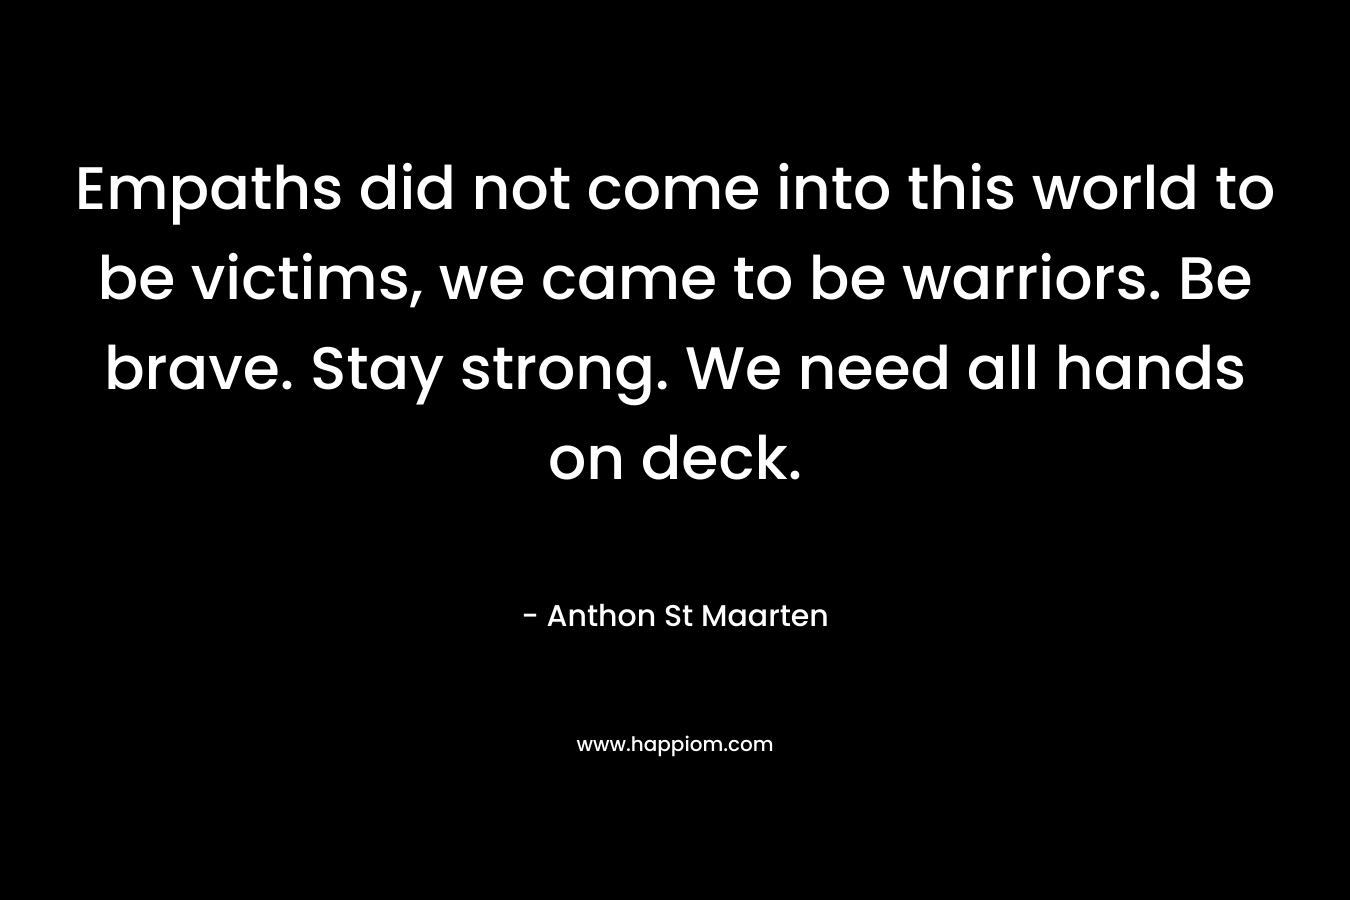 Empaths did not come into this world to be victims, we came to be warriors. Be brave. Stay strong. We need all hands on deck. – Anthon St Maarten